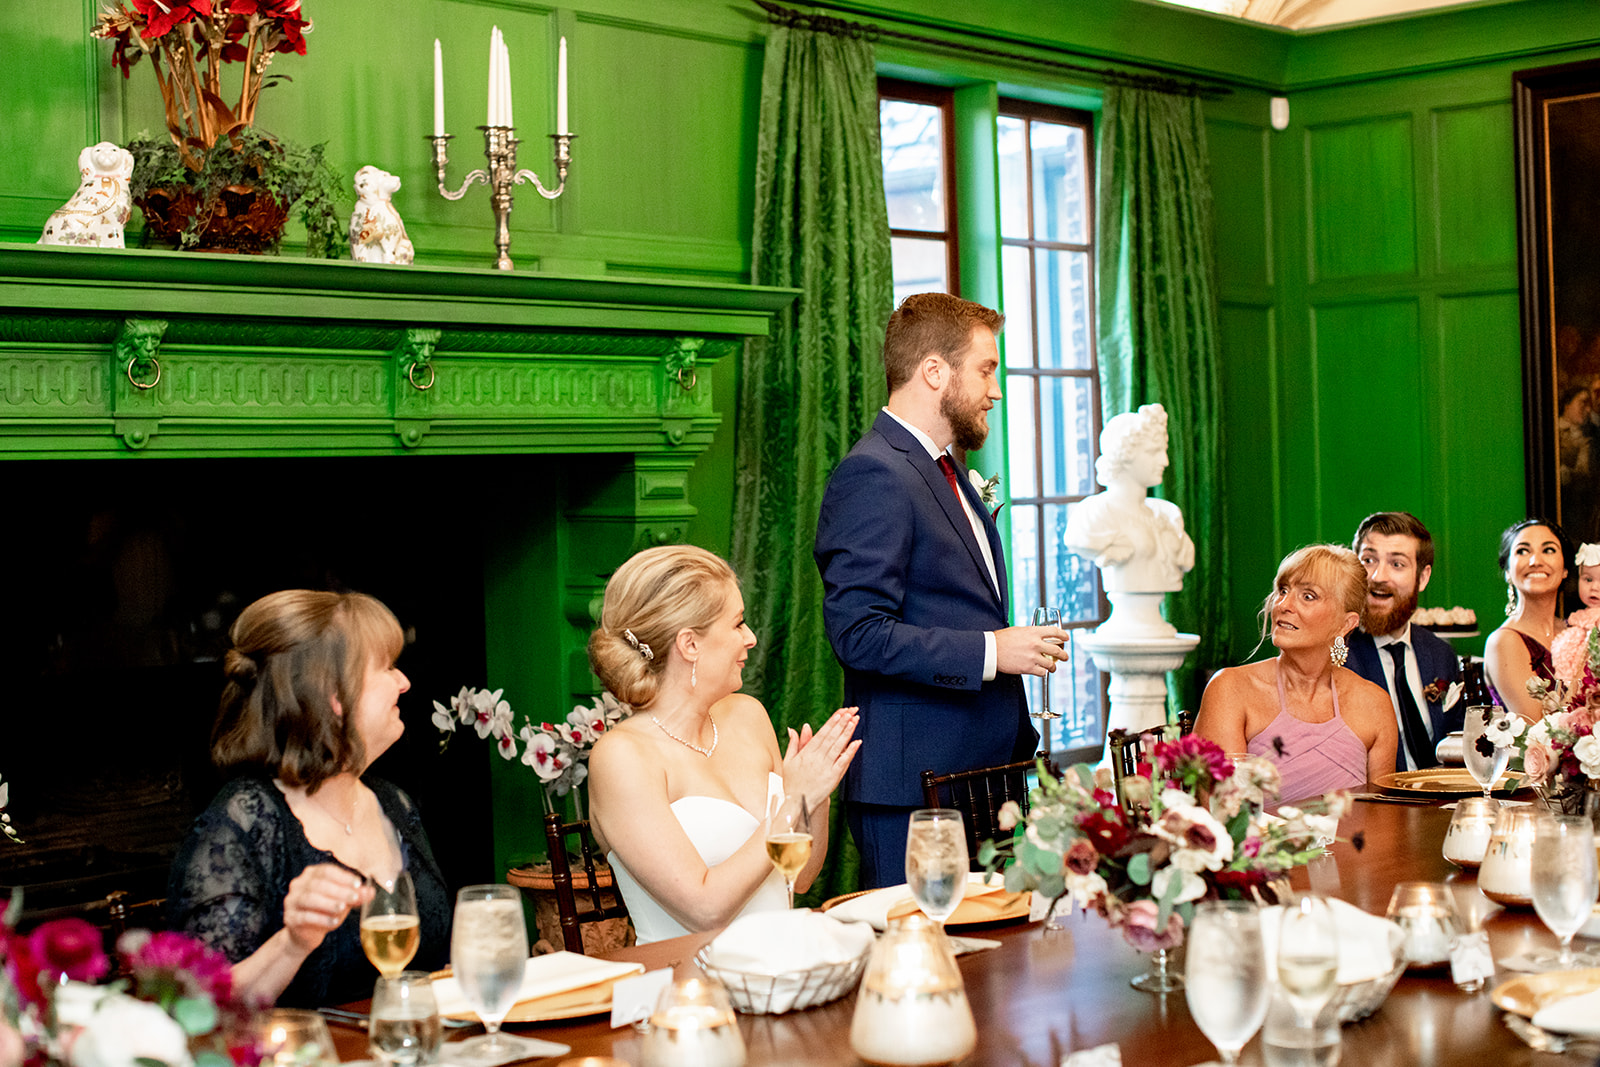 Claire  Ryans Intimate Wedding at Dover Hall - Image Property of www.j-dphoto.com